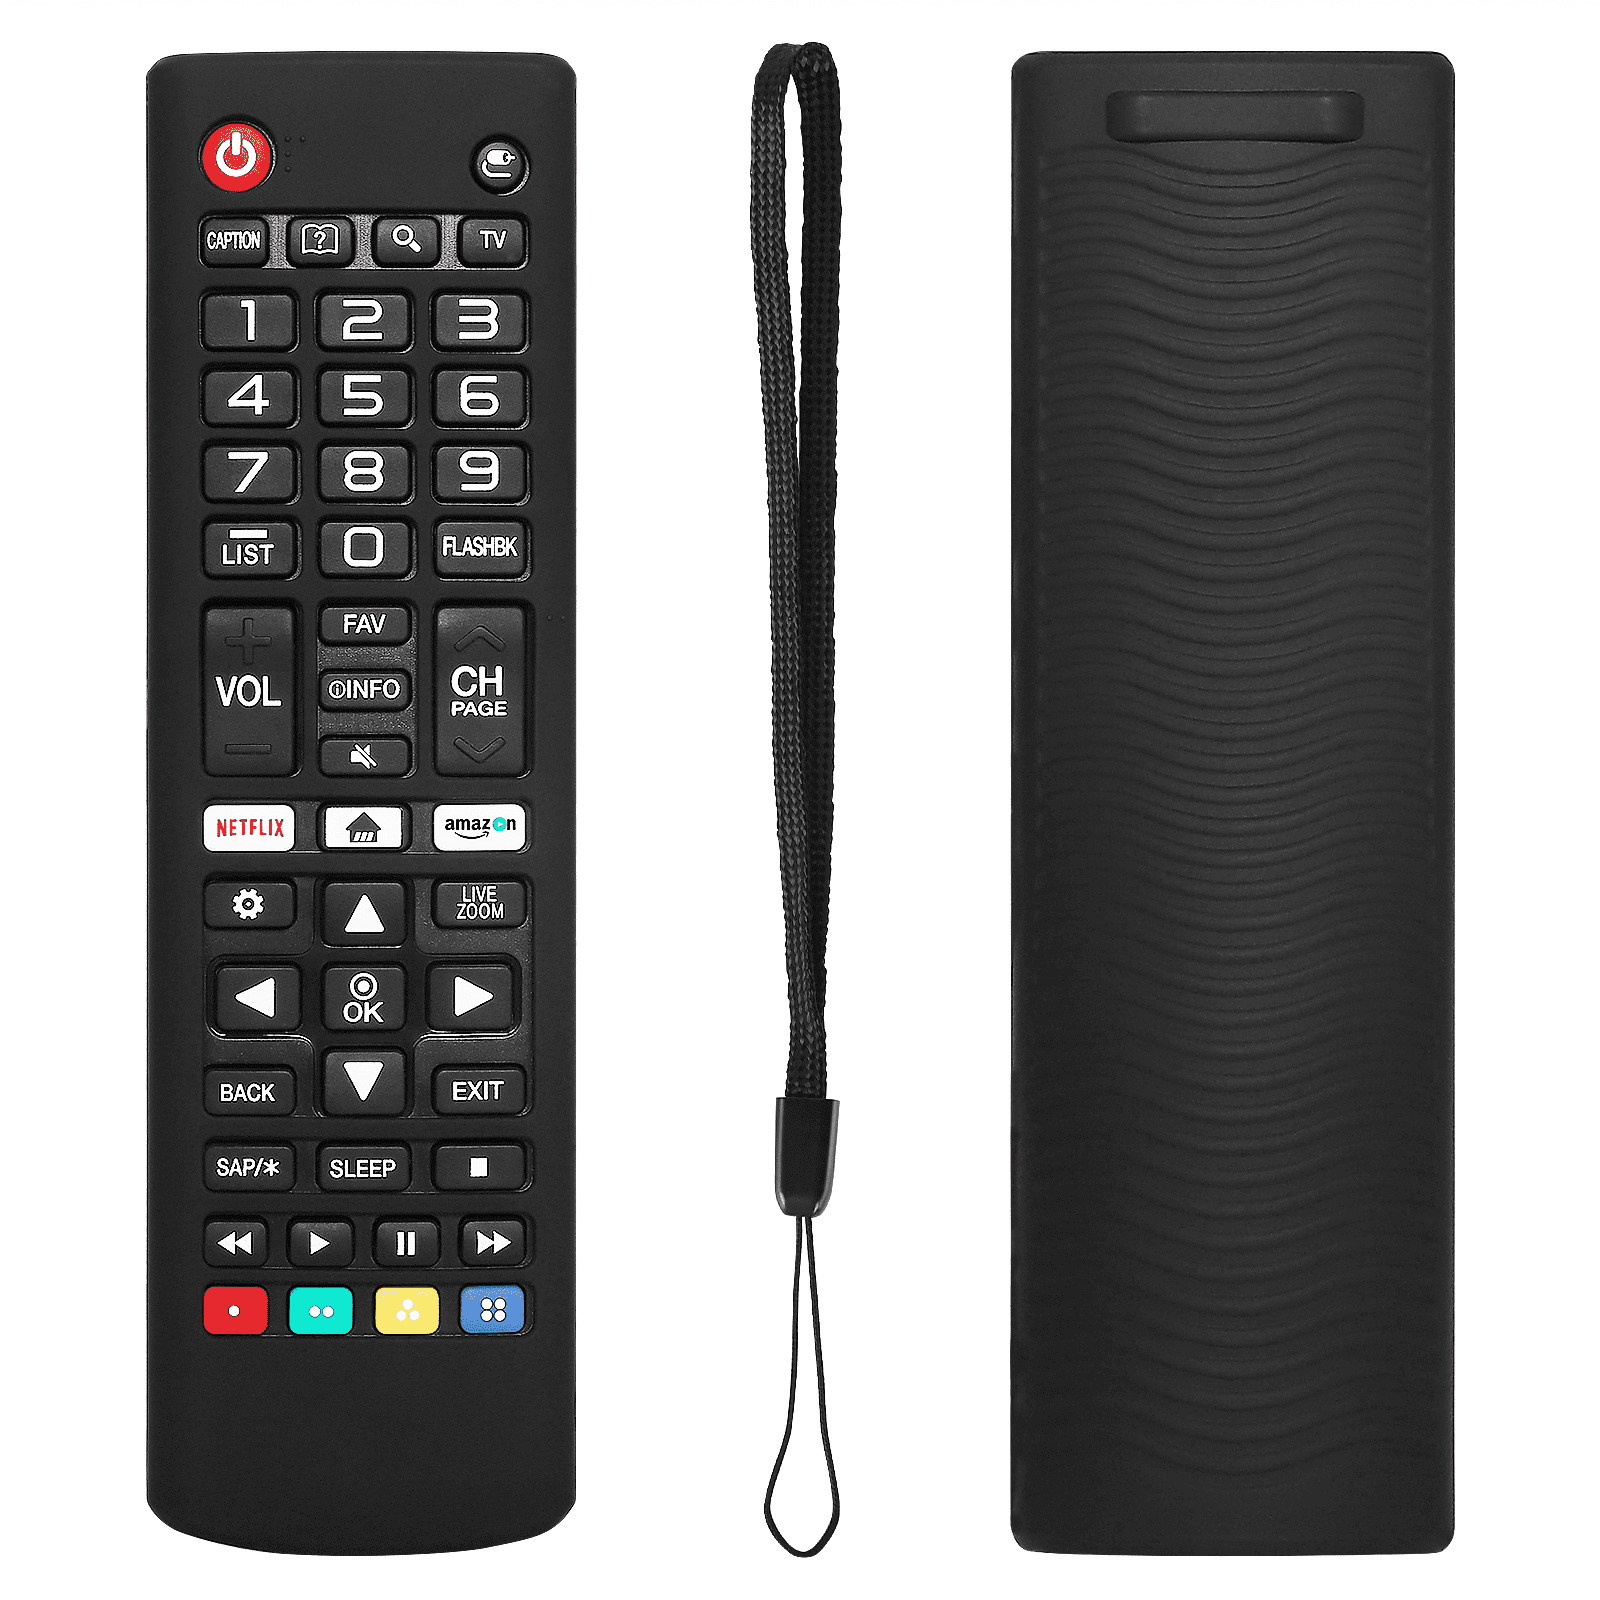 Universal Remote Control for 60UN7000PUB And All Other LG Smart TV Models  LCD LED 3D HDTV QLED Smart TV With Protective Case 